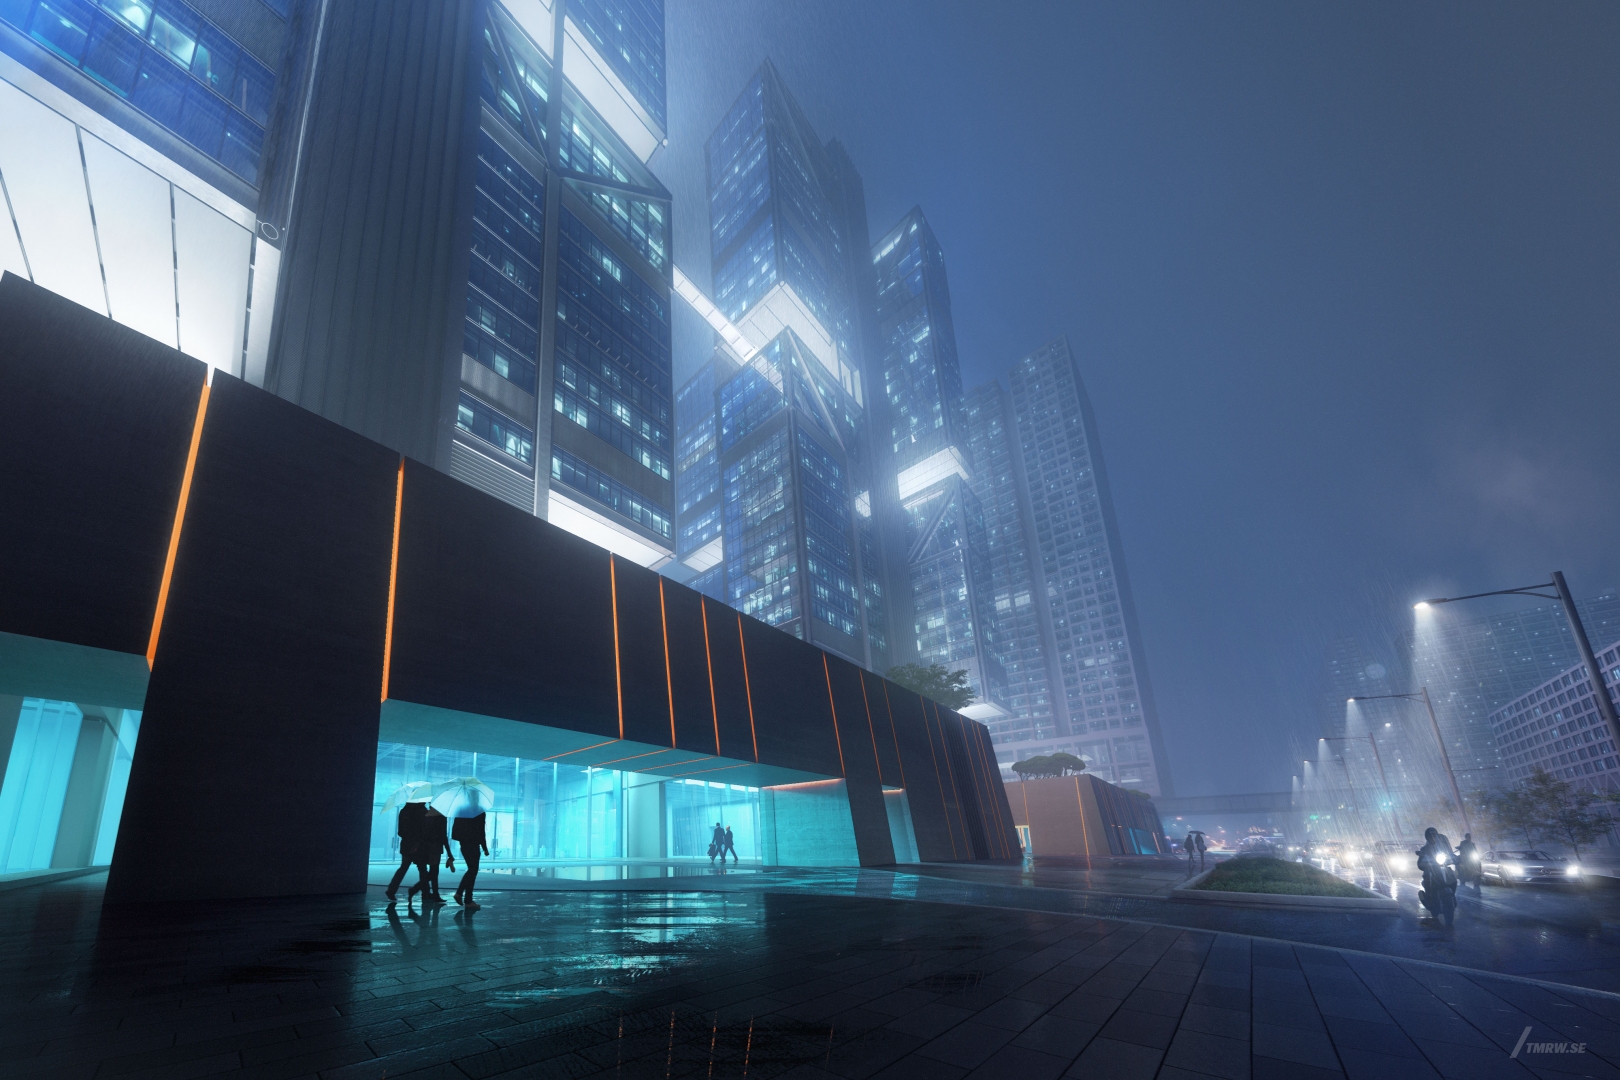 Architectural visualization of DJI for Foster + Partners. An image of the exterior of several office buildings at night while raining from street view.